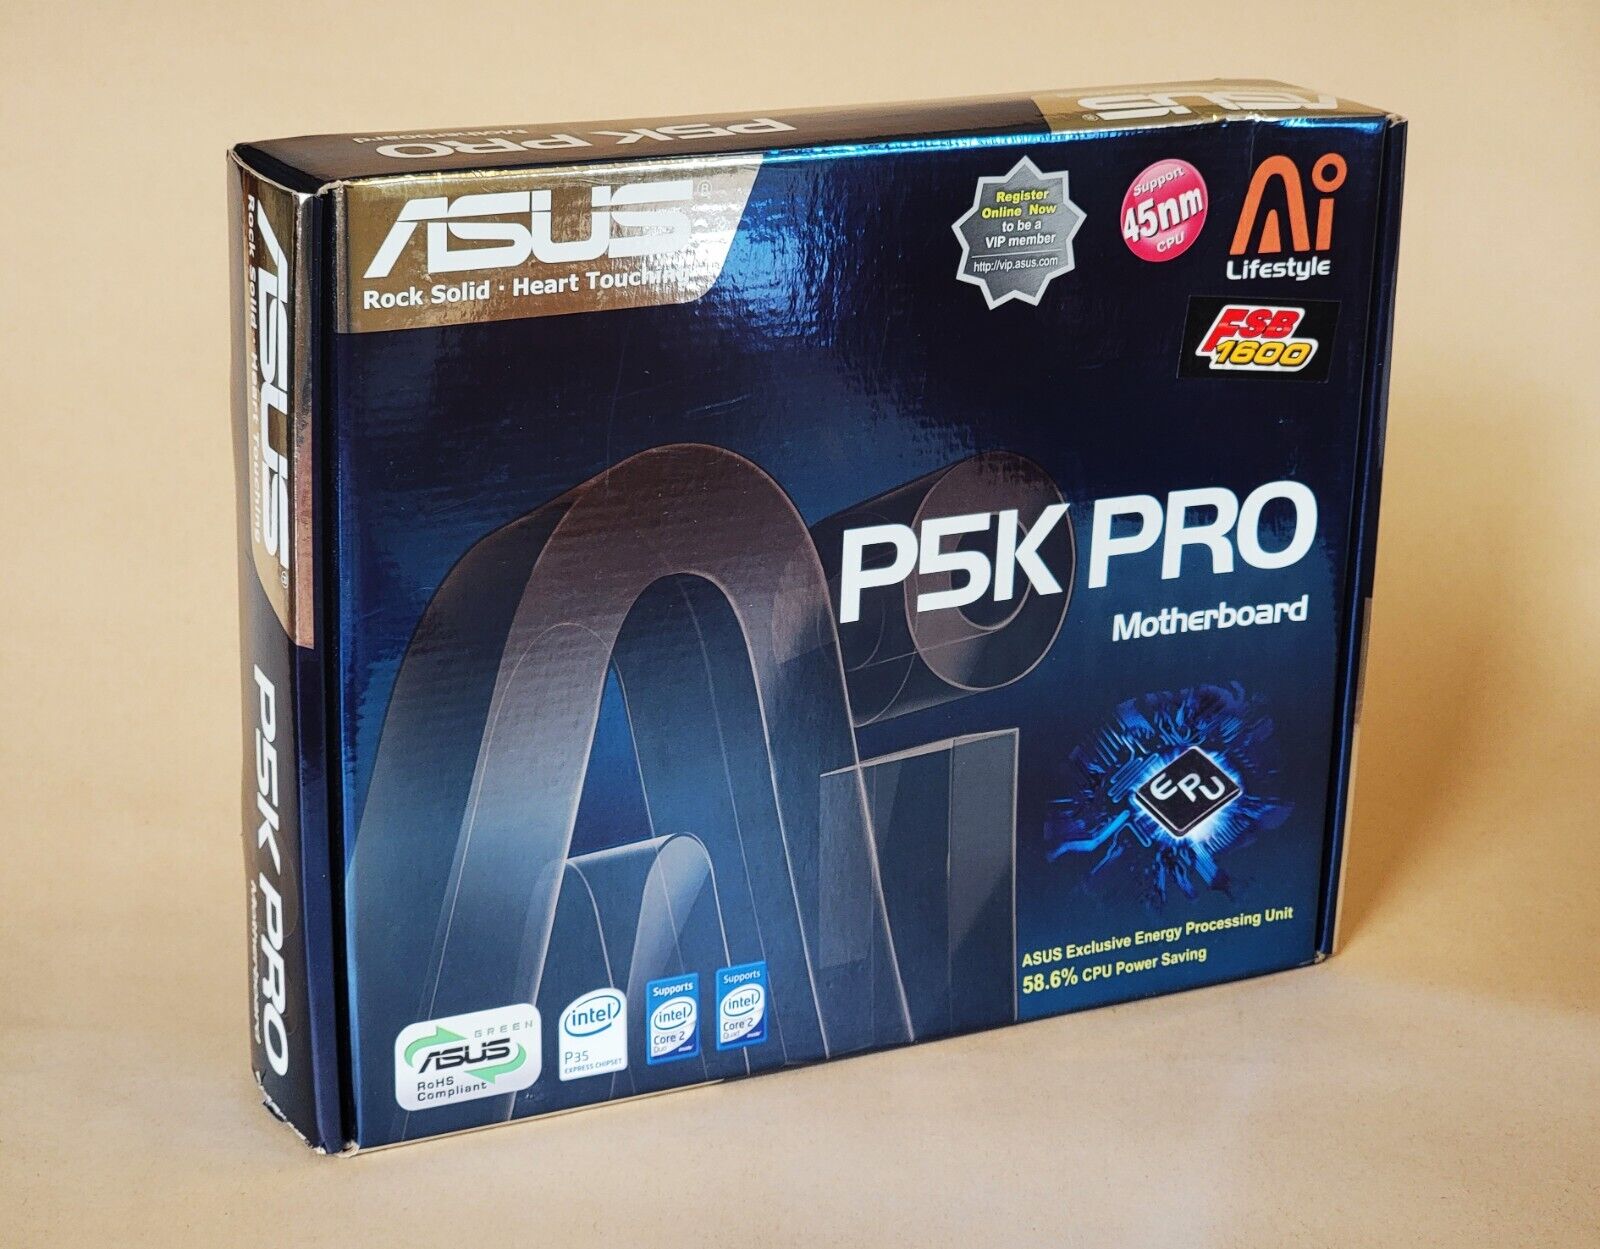 ASUS P5K Pro Motherboard - BRAND NEW IN BOX